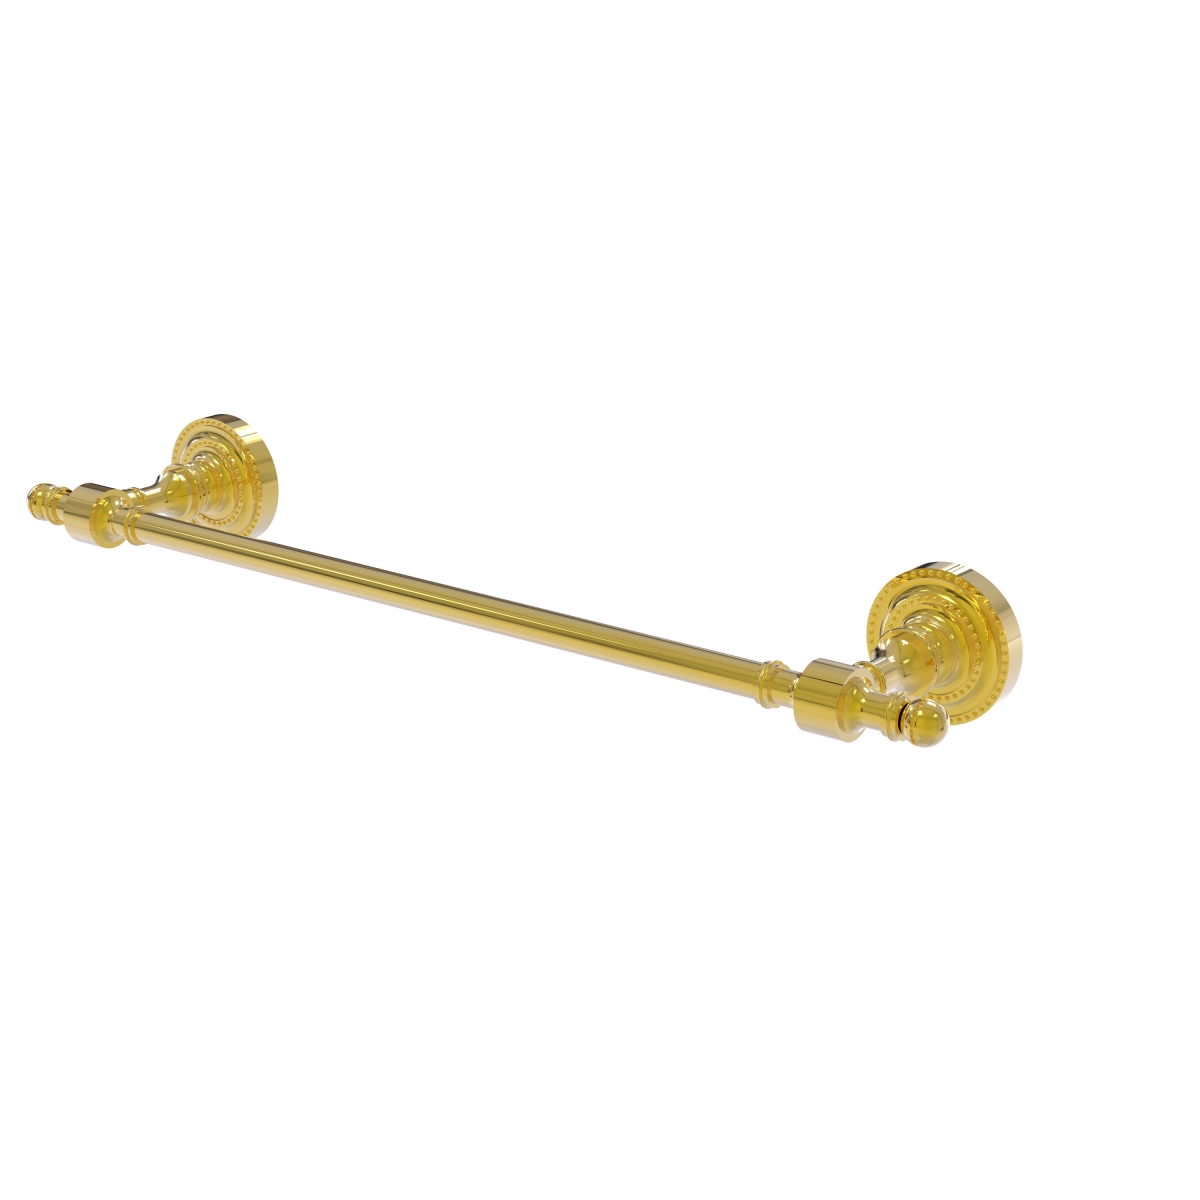 Allied Brass RD-31-36-UNL Retro Dot Collection 36 in. Towel Bar, Unlacquered Brass